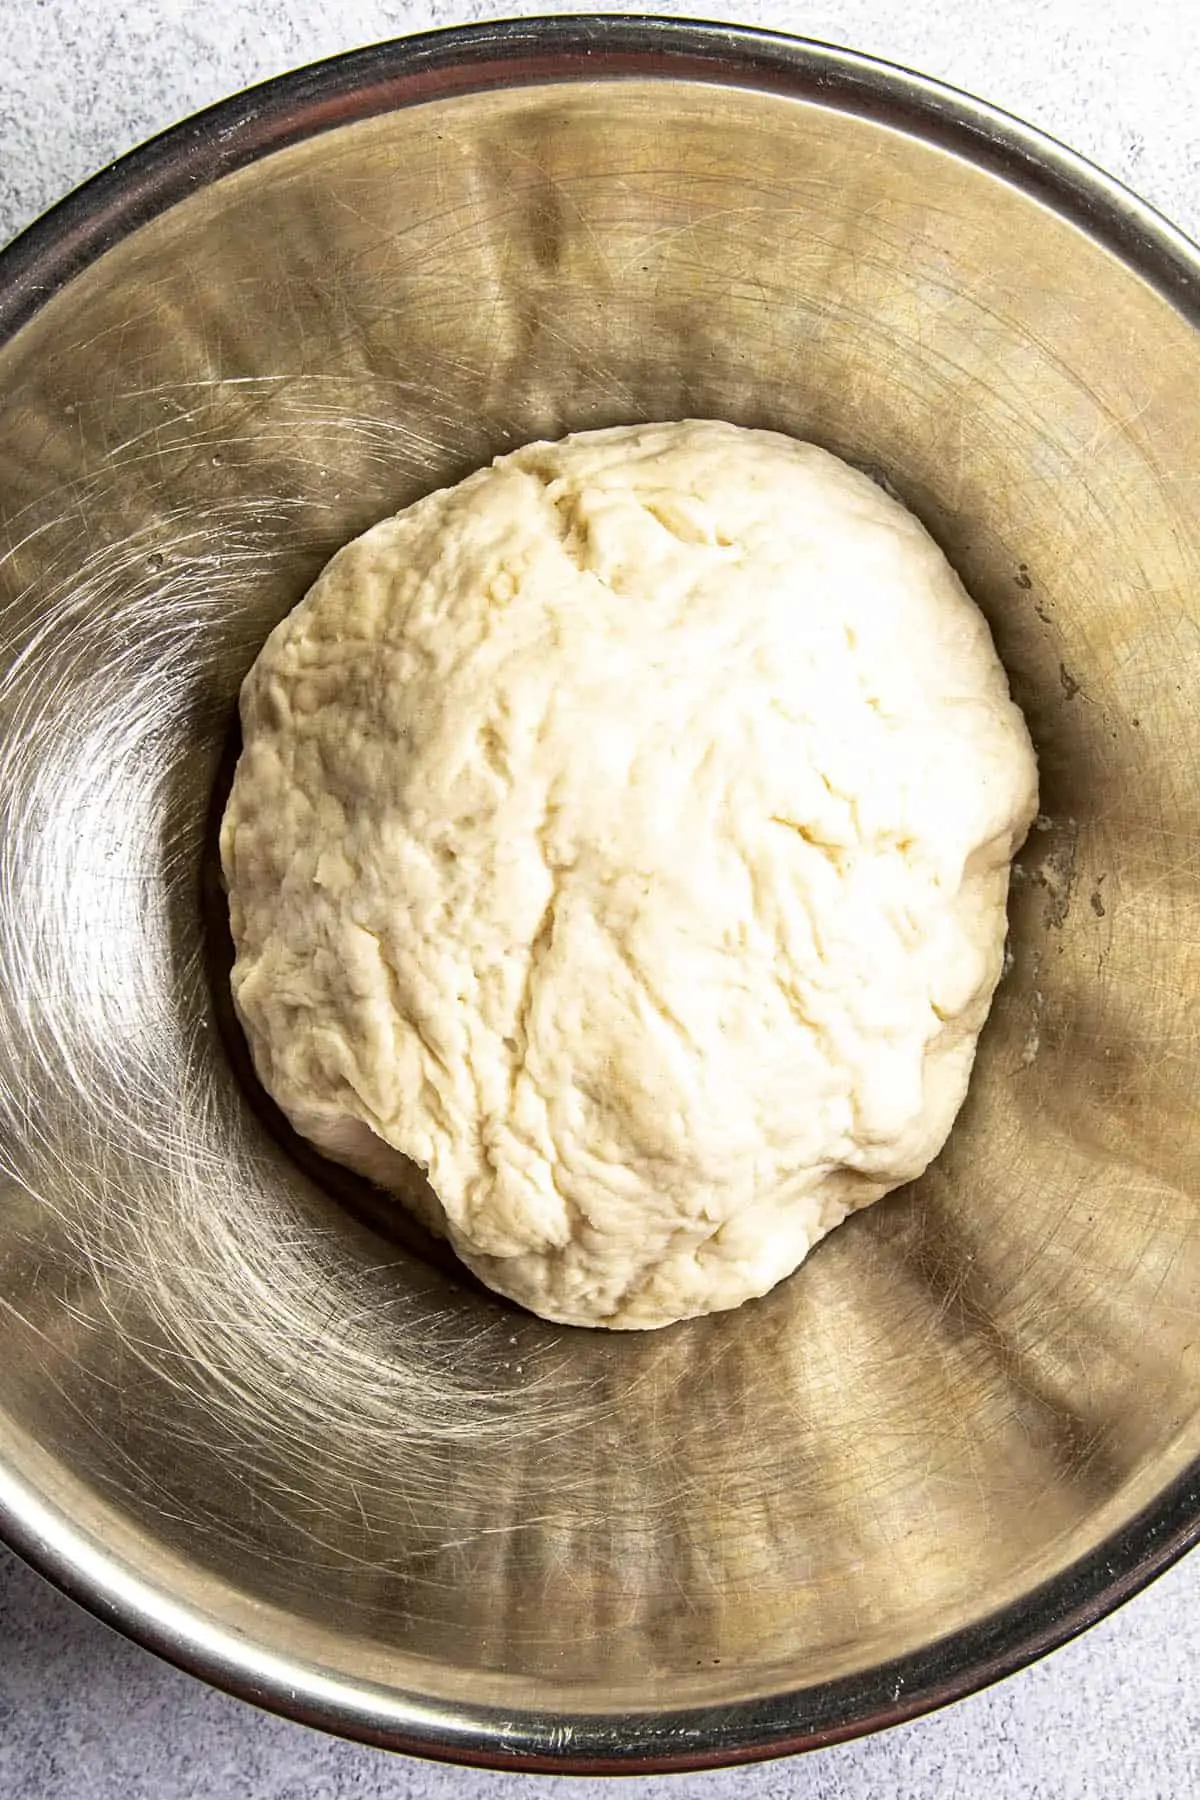 A mixed pizza dough ball, starting to rise